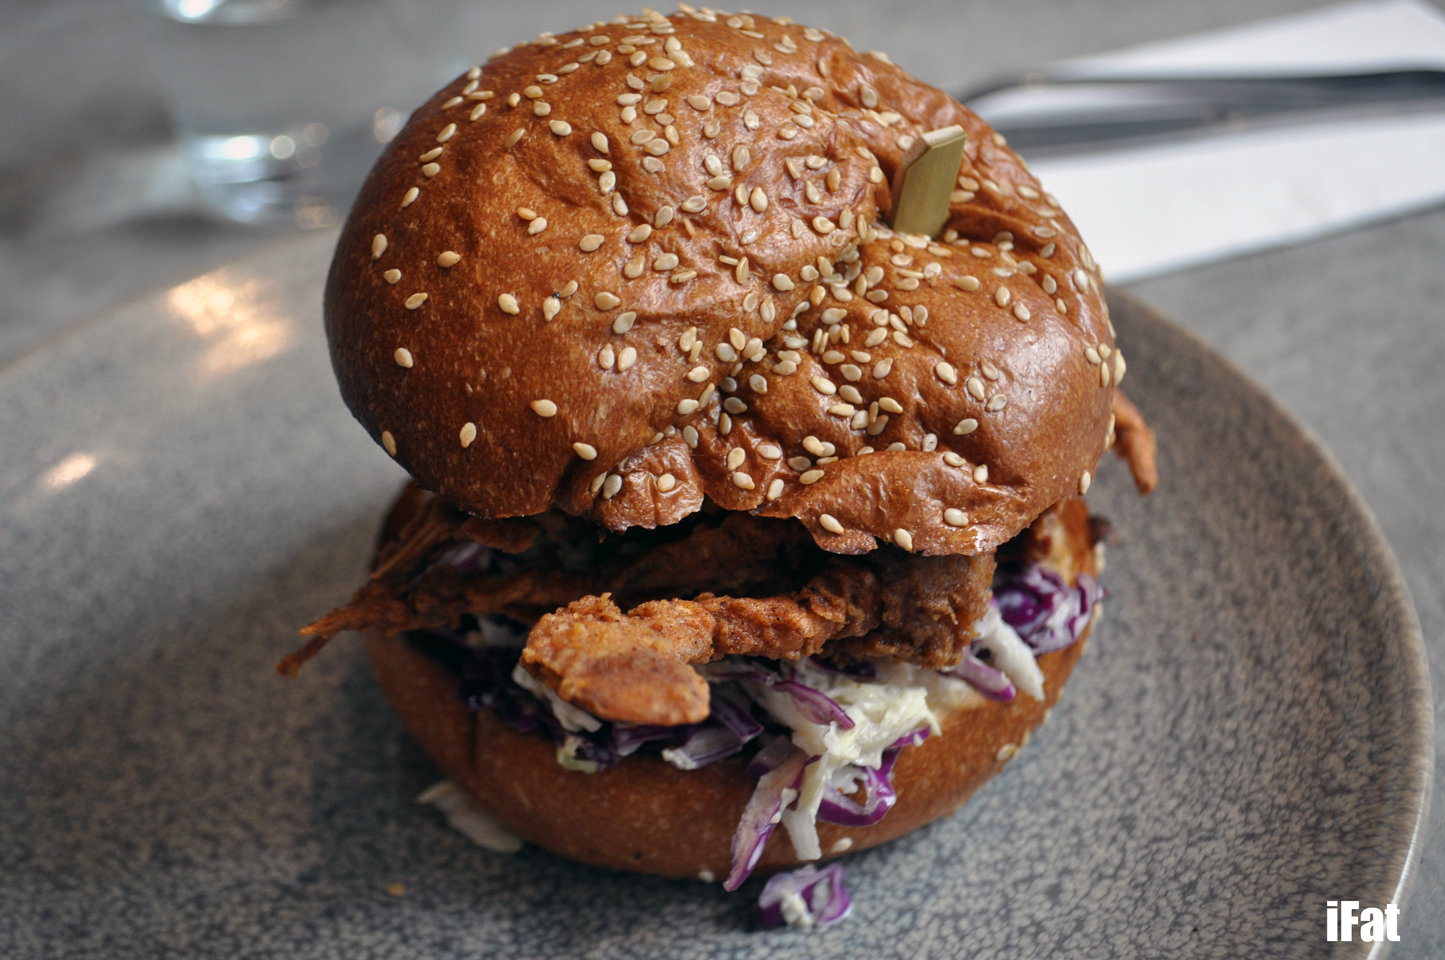 Soft shell crab po boy at Paramount Coffee Project, Surry Hills